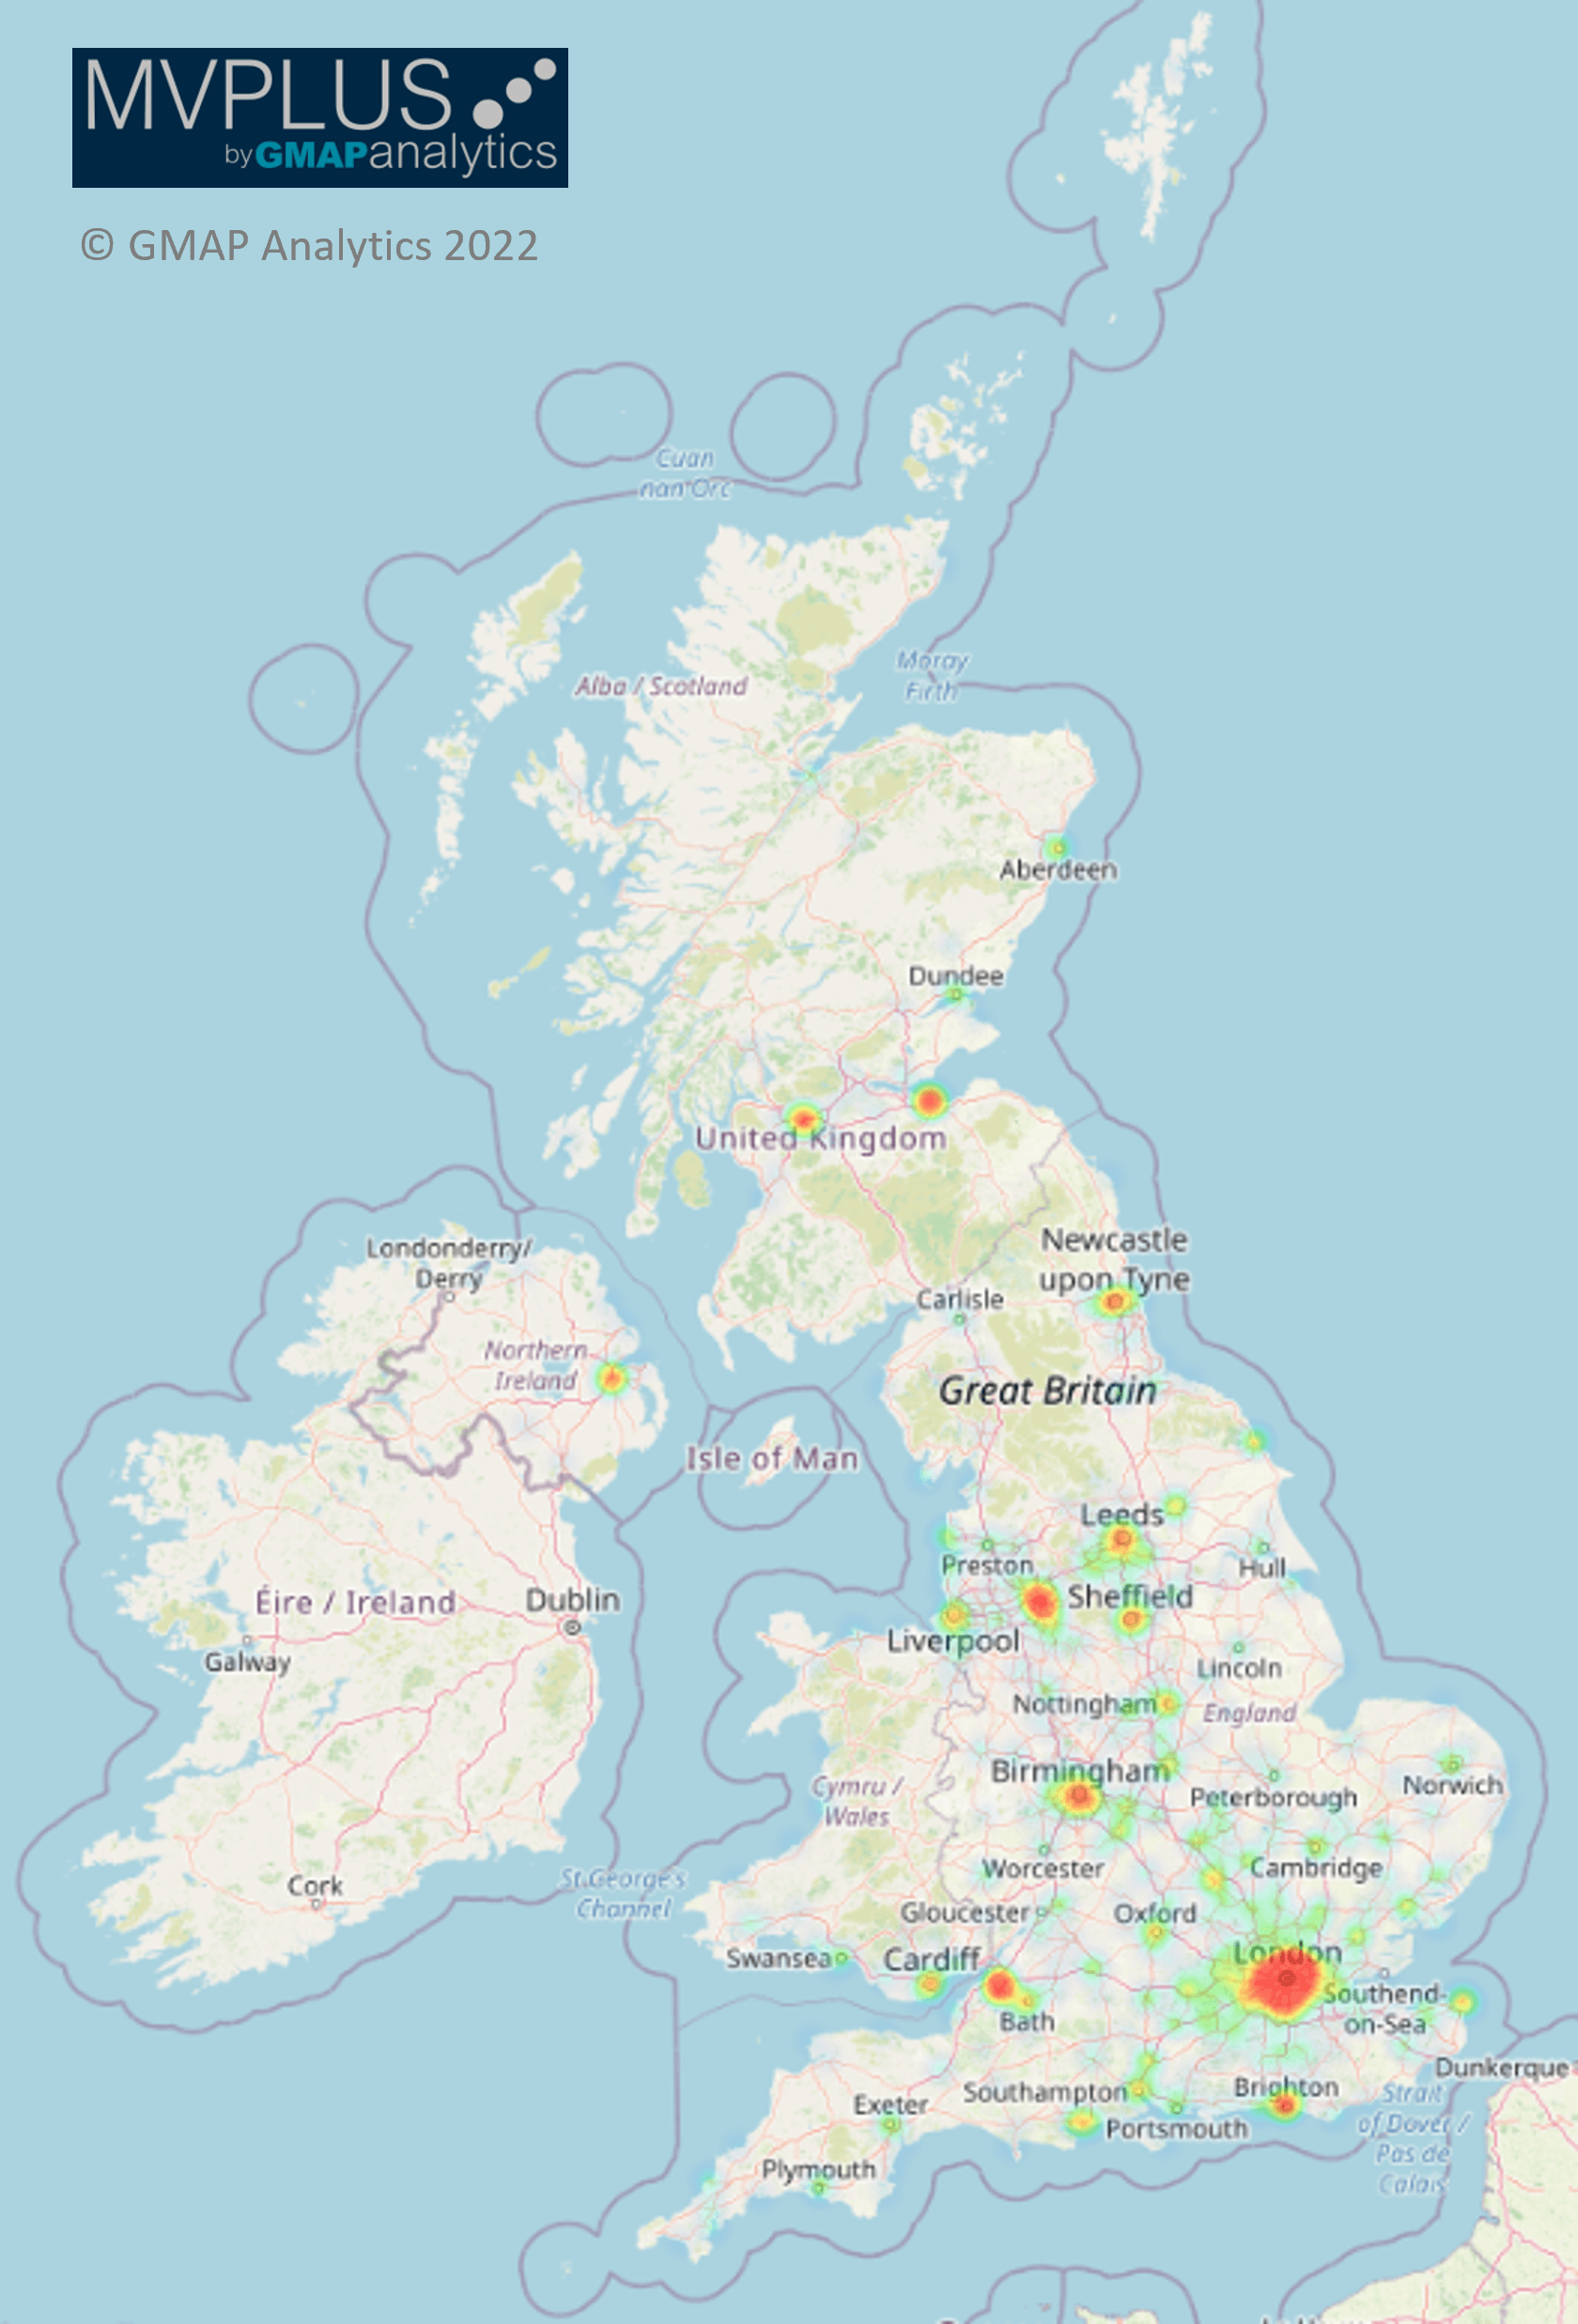 Restaurants location data and map of the top places for UK Pizza restaurants